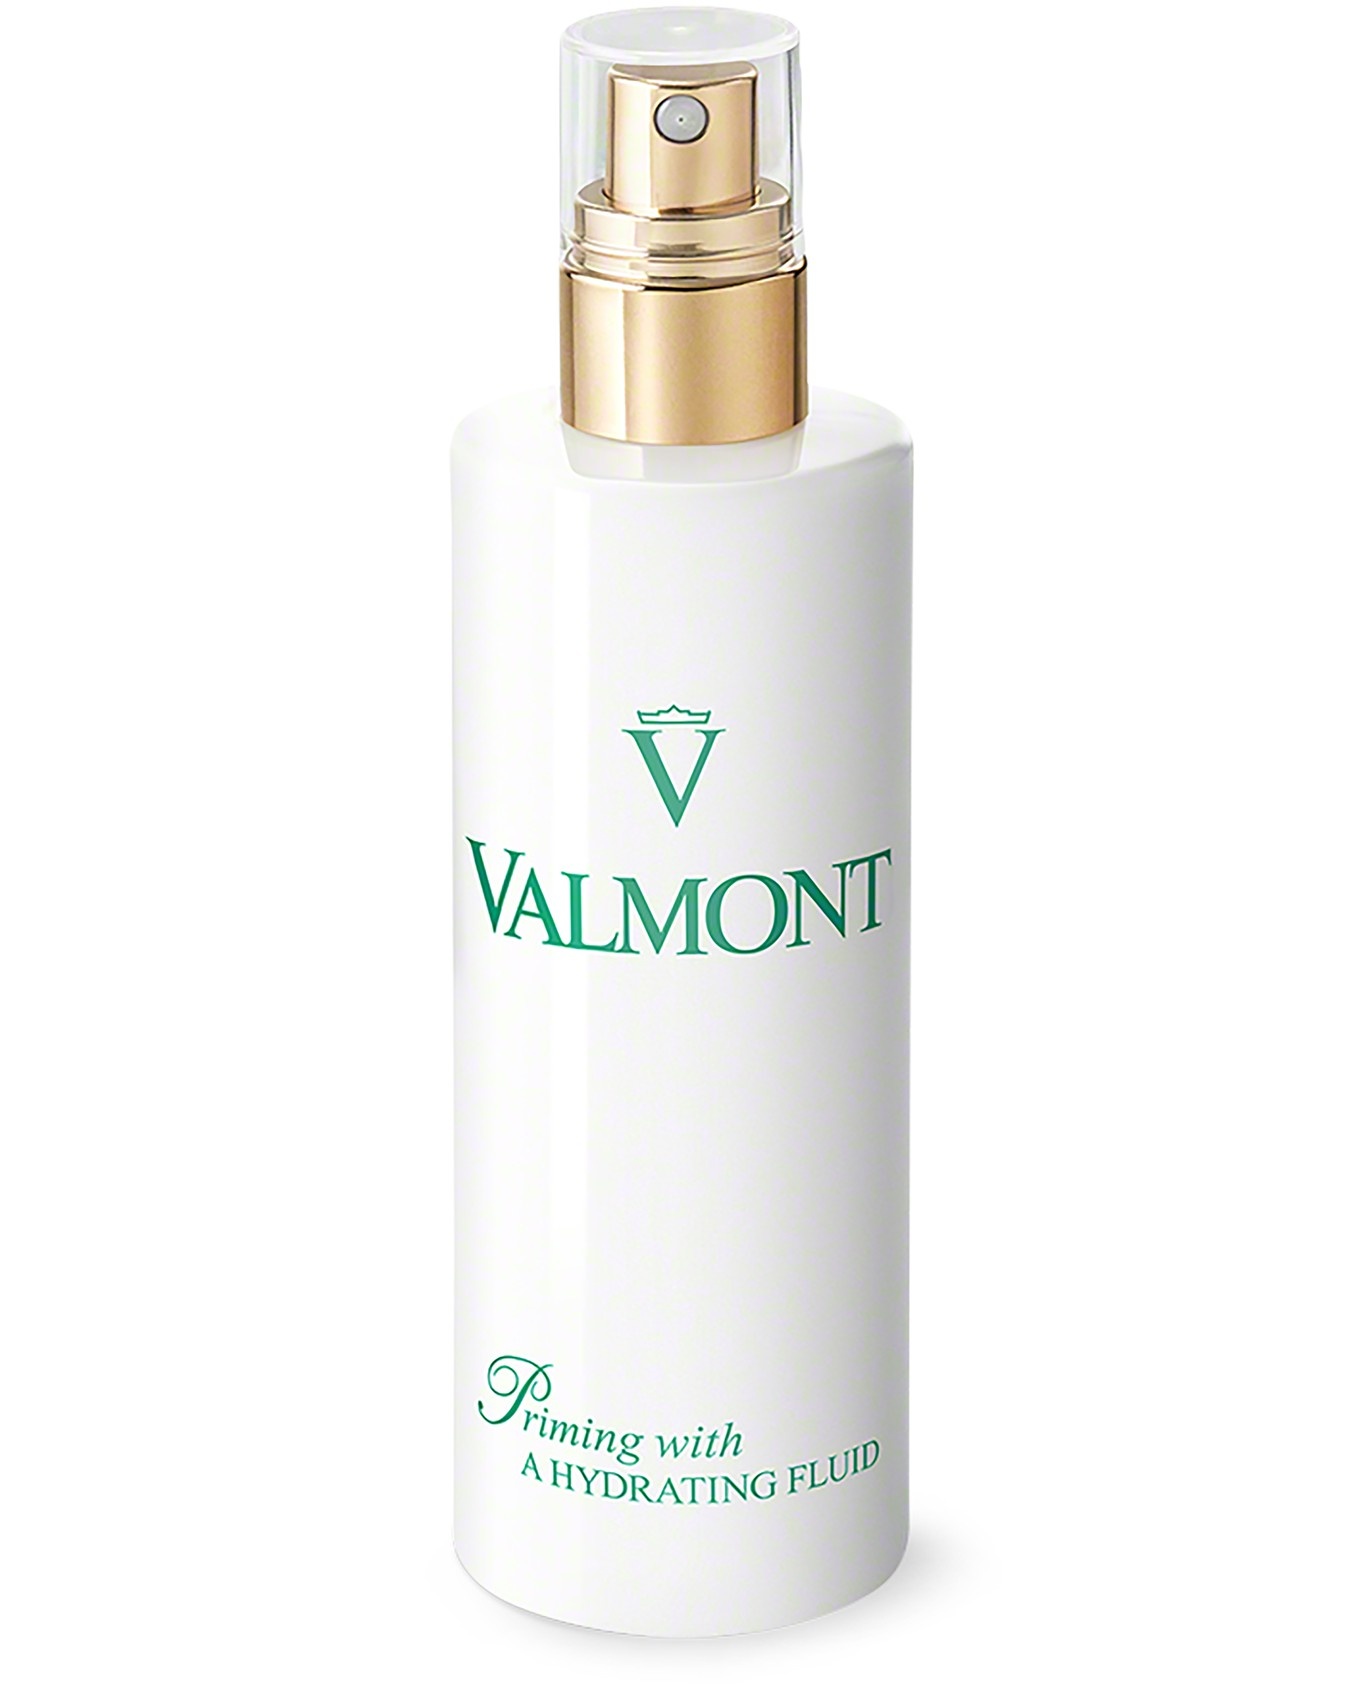 Valmont Valmont Priming with a hydrating fluid 150ml